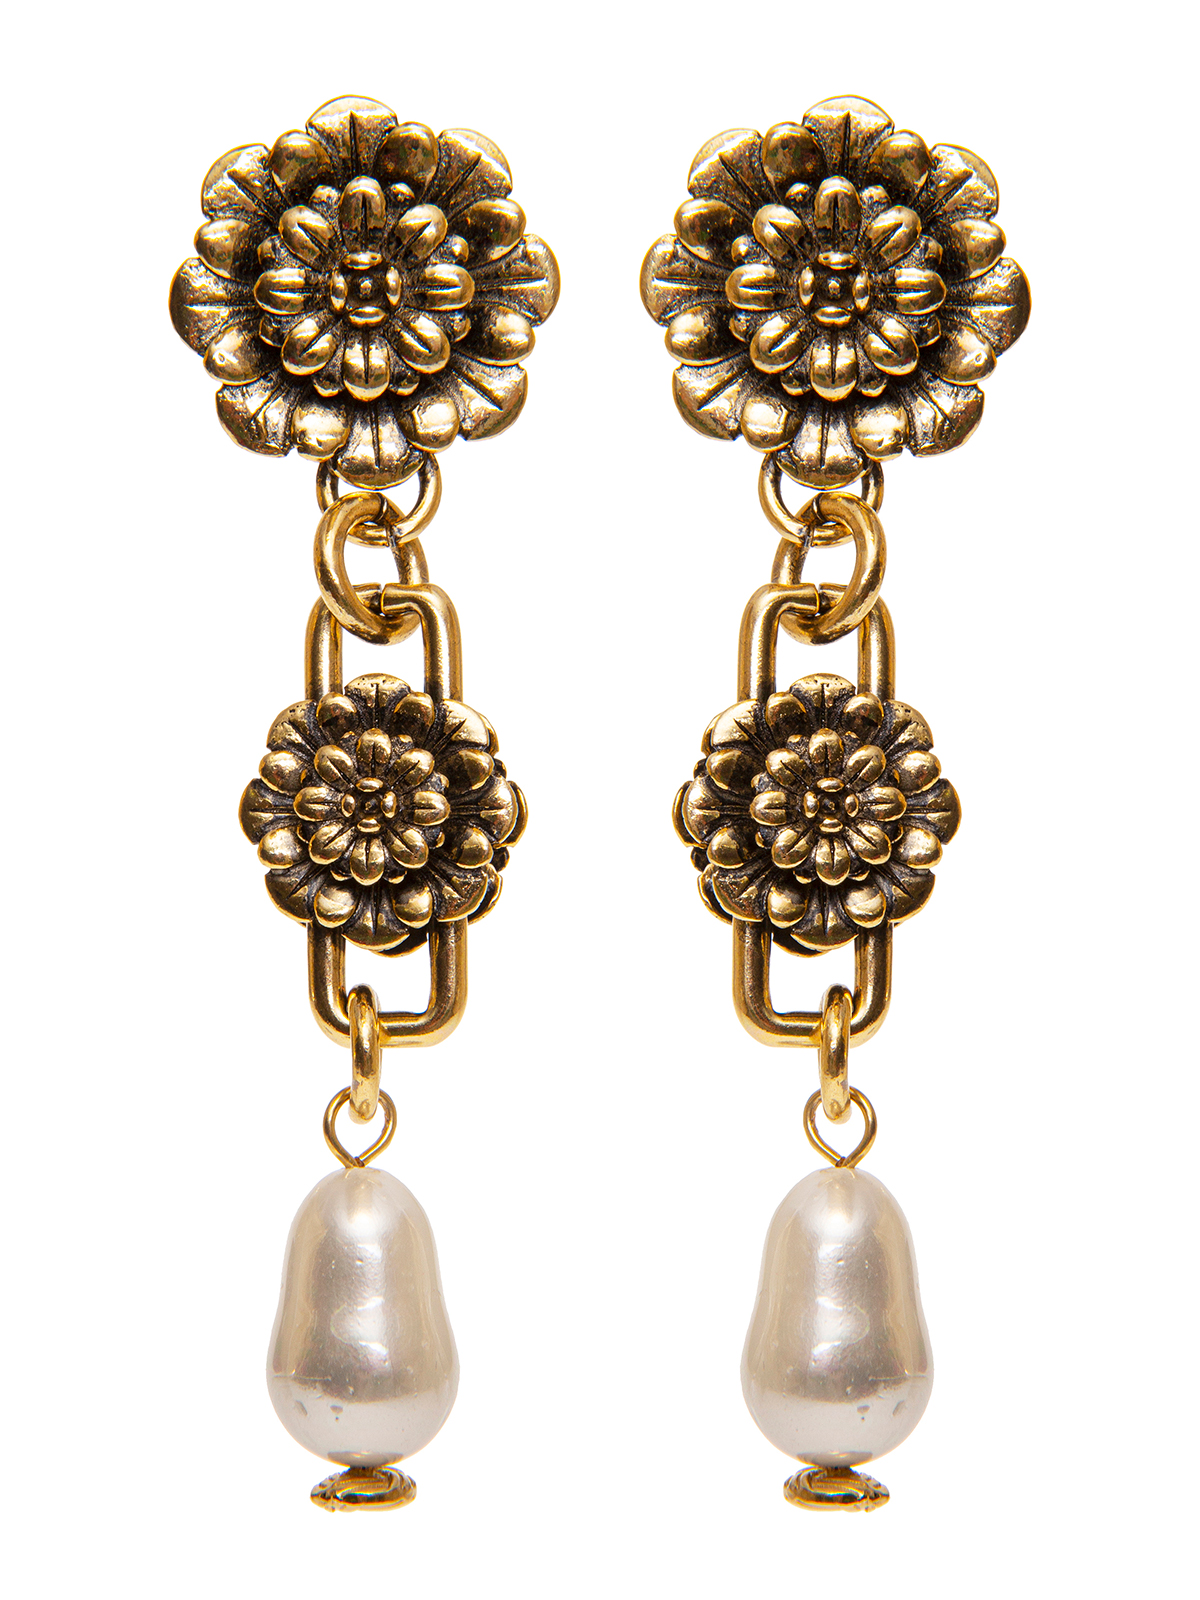 Pendent flower earrings with glass drop